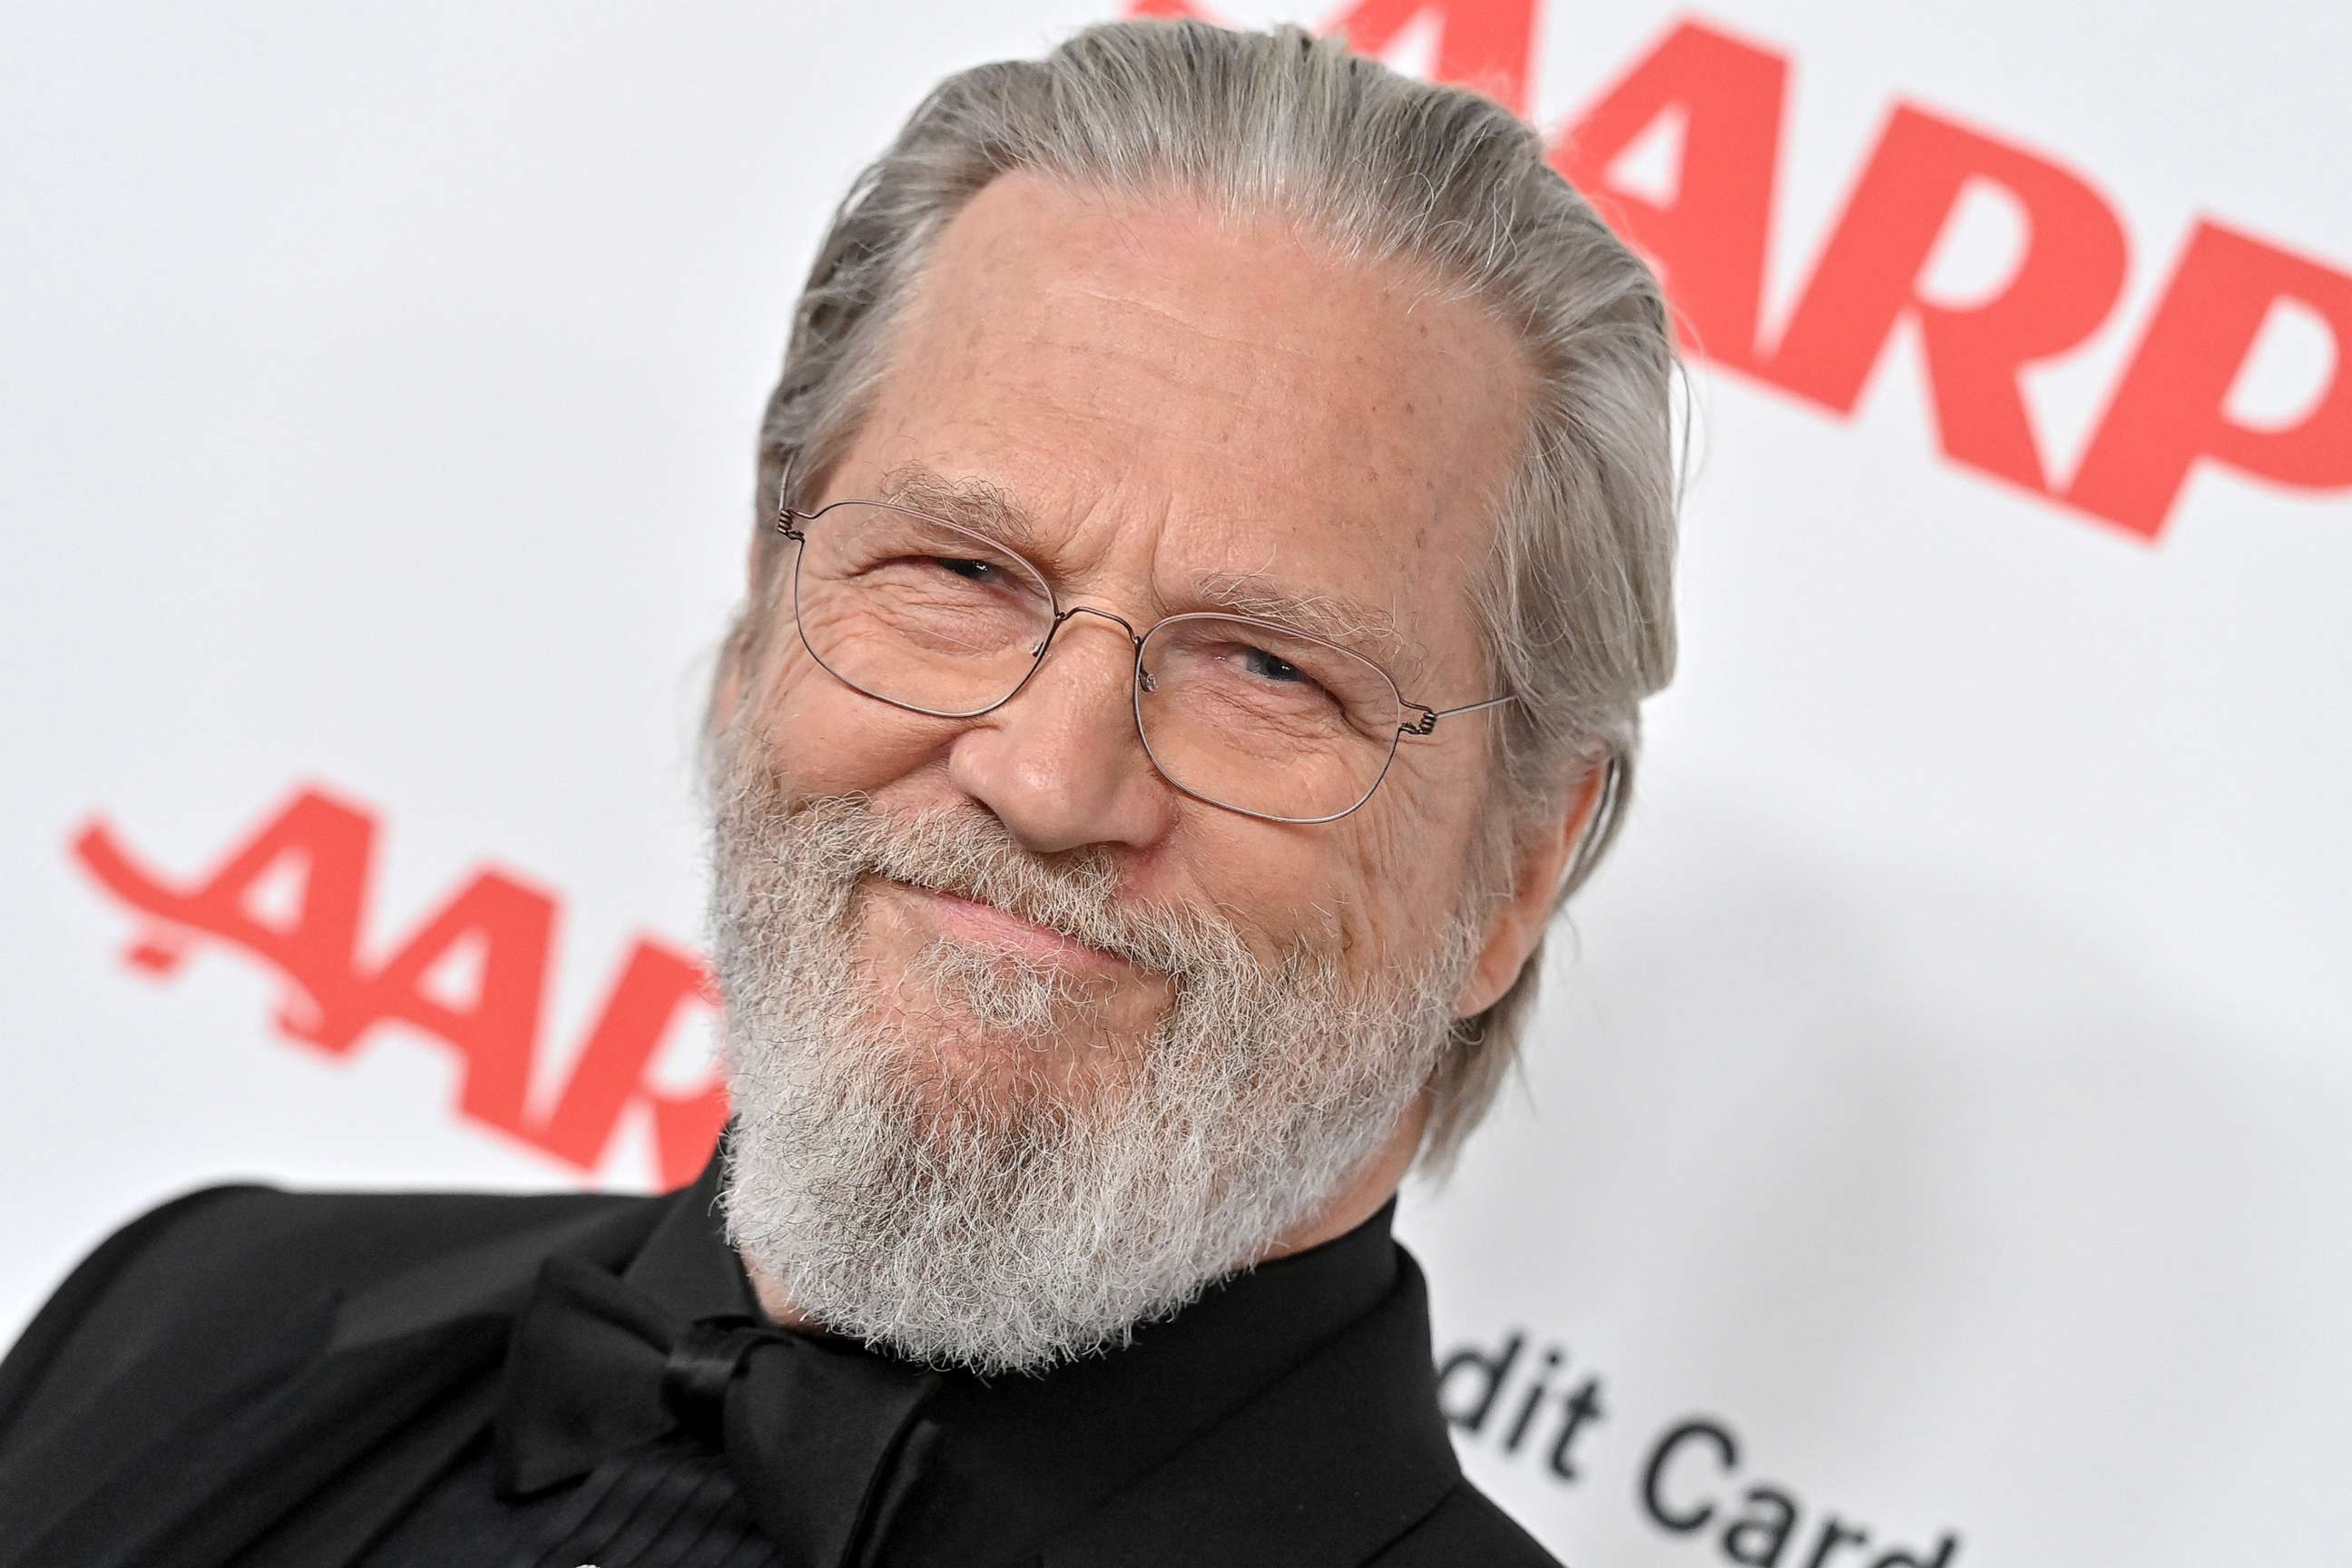 PHOTO: Jeff Bridges attends the "AARP The Magazine's" 21st Annual Movies For Grownups Awards at Beverly Wilshire, A Four Seasons Hotel, Jan. 28, 2023, in Beverly Hills, Calif.